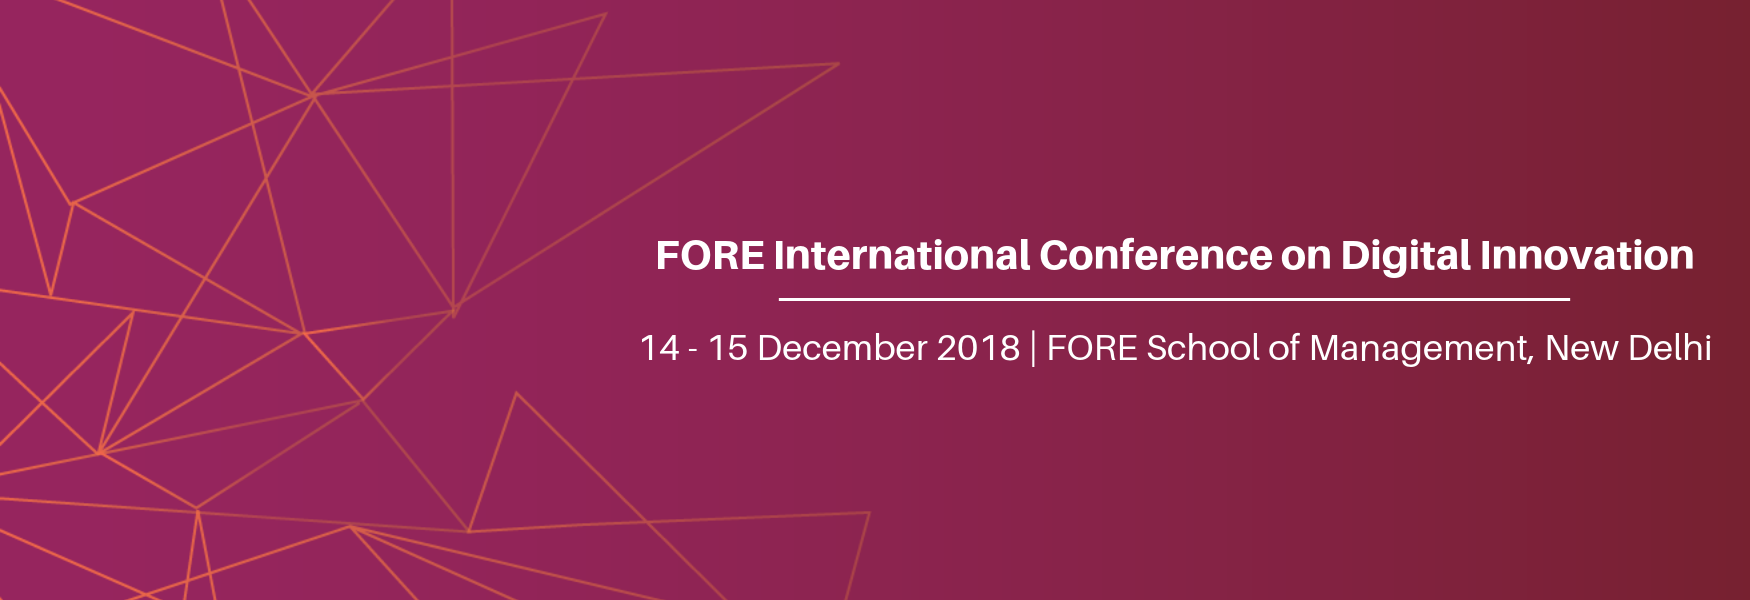 FORE International Conference on Digital Innovation